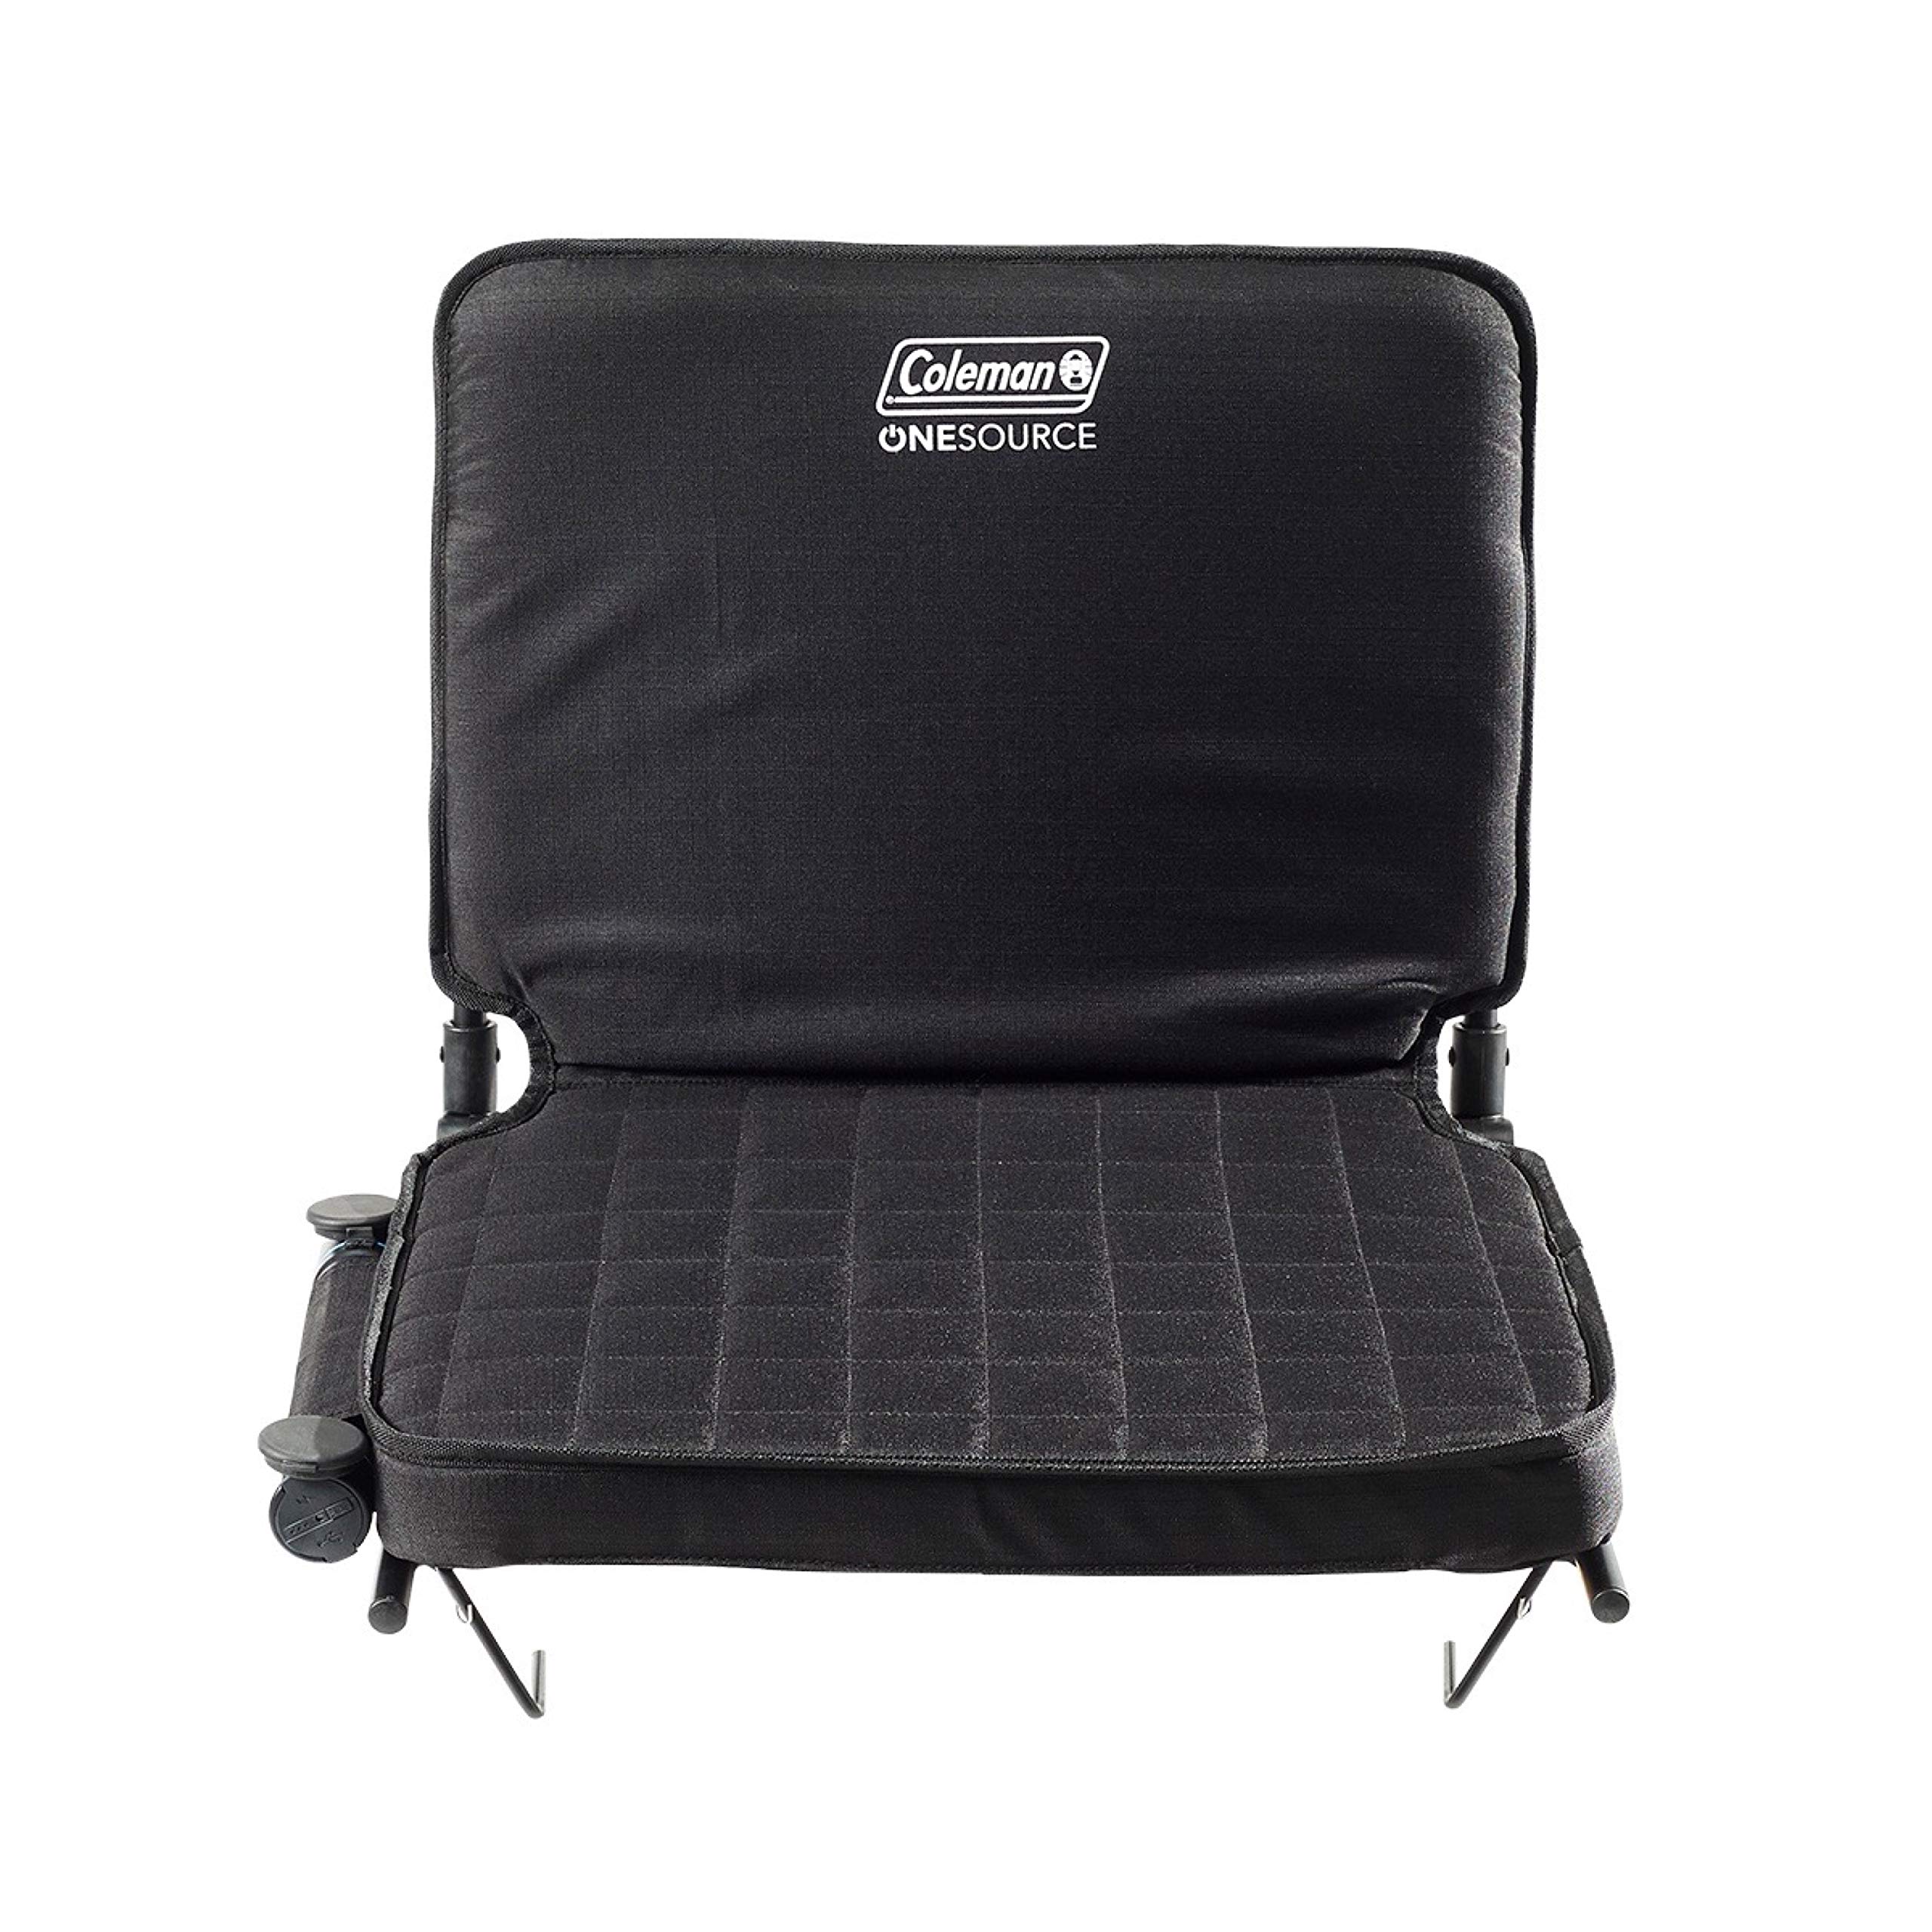 Coleman Rechargeable Bleacher Seat | OneSource Stadium Seat & Lithium Ion Battery $55.13